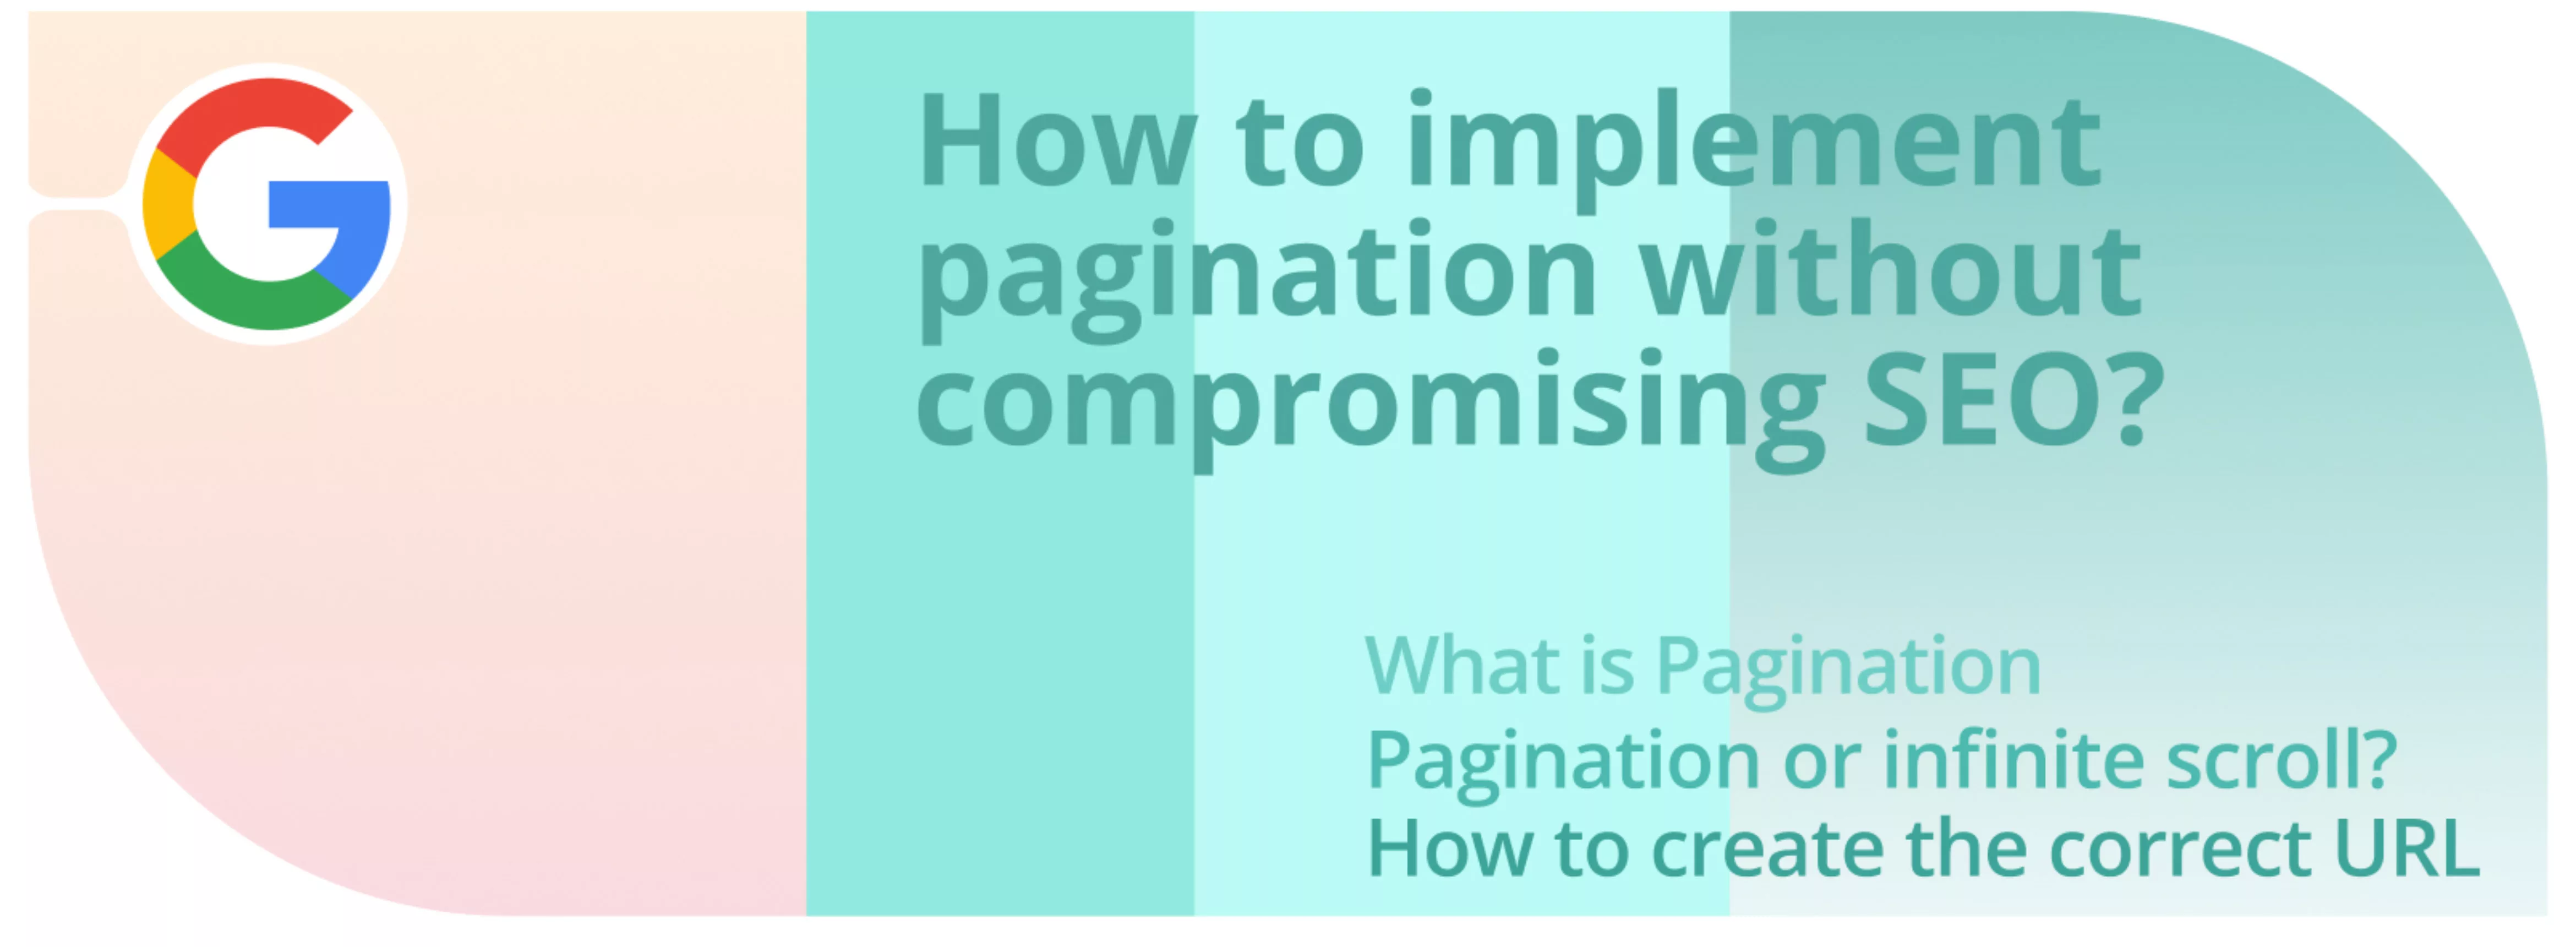 How to Implement Pagination Correctly Without Impacting SEO